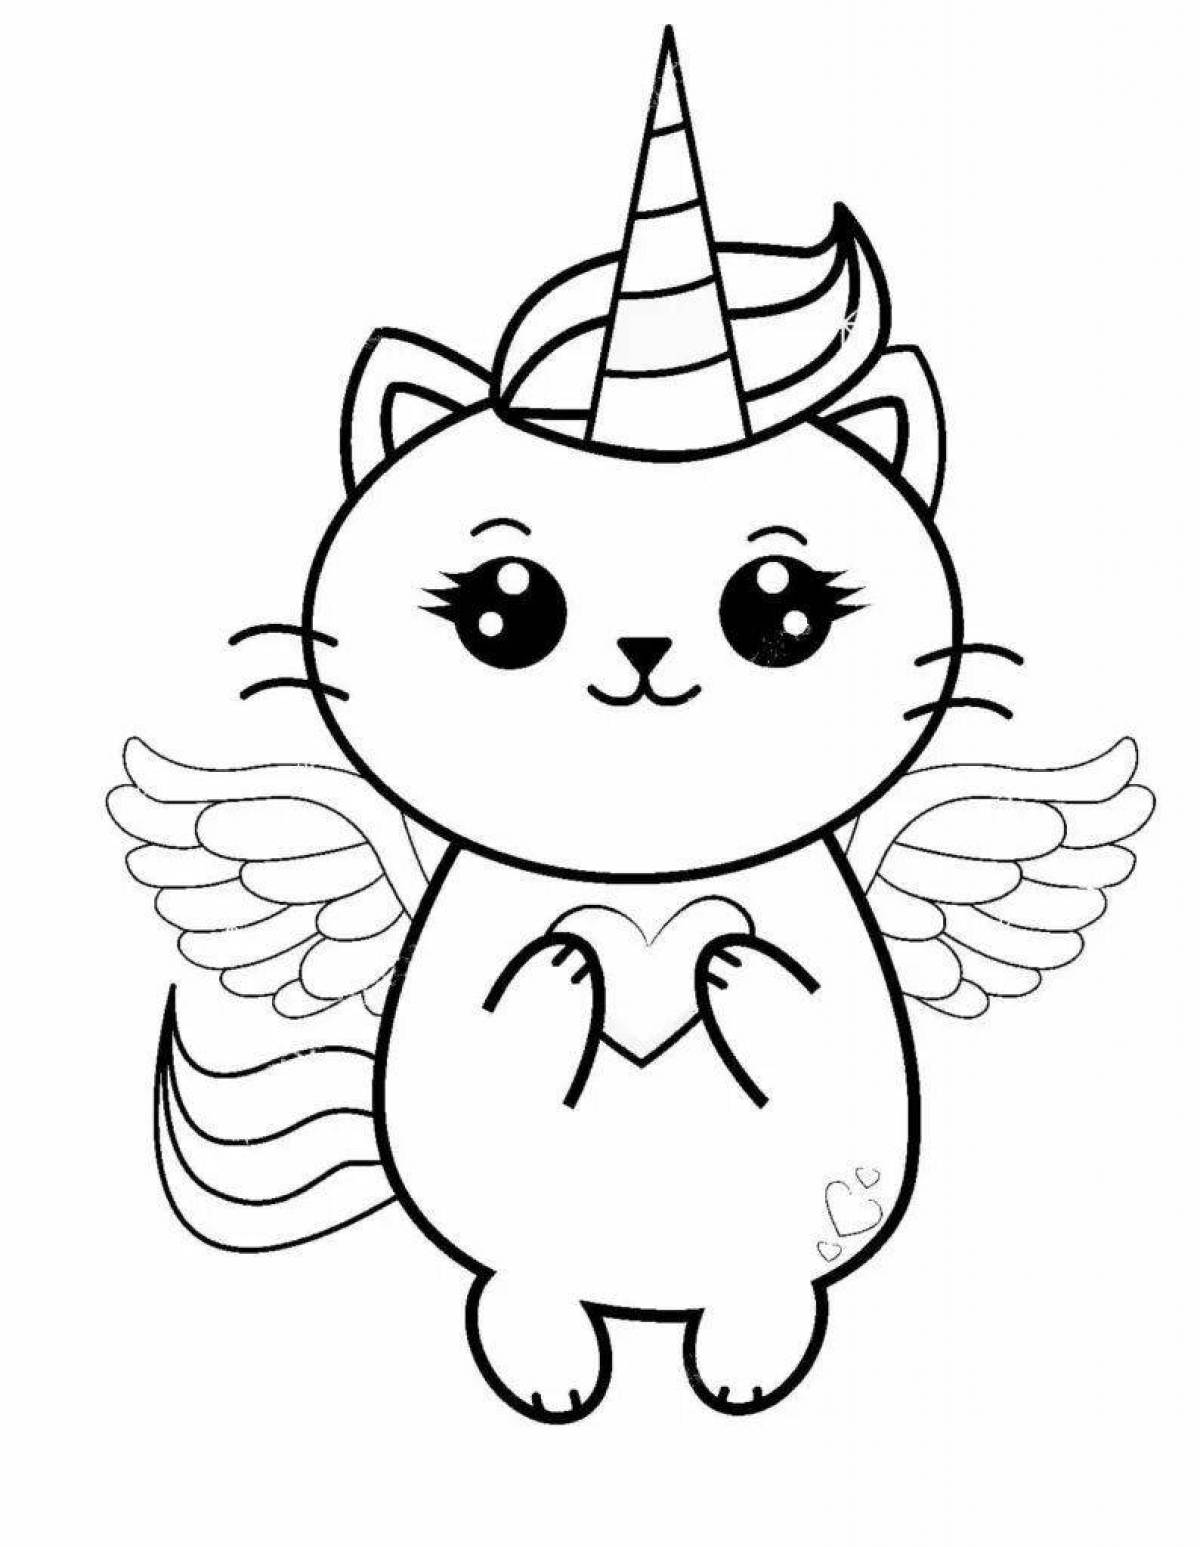 Awesome unicorn cat coloring book for kids